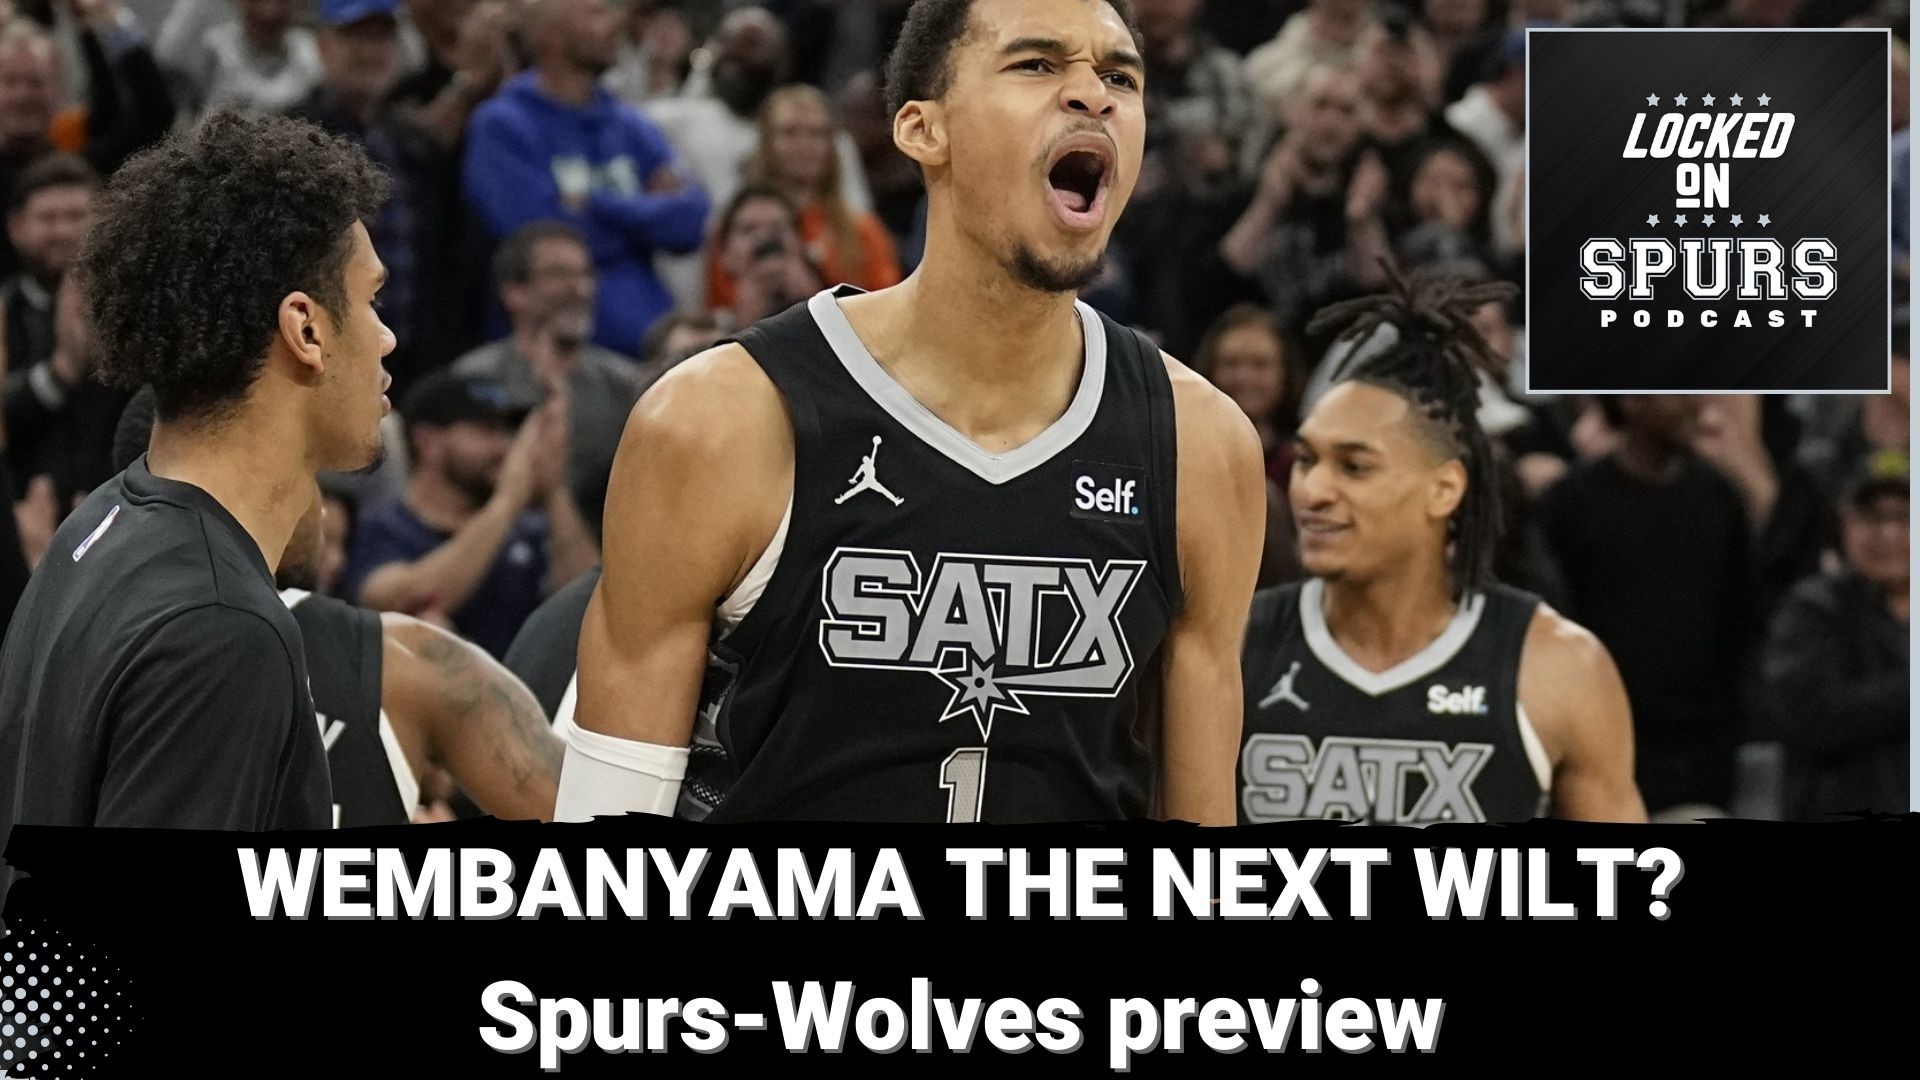 Also, a preview of tonight's Spurs-Wolves matchup.